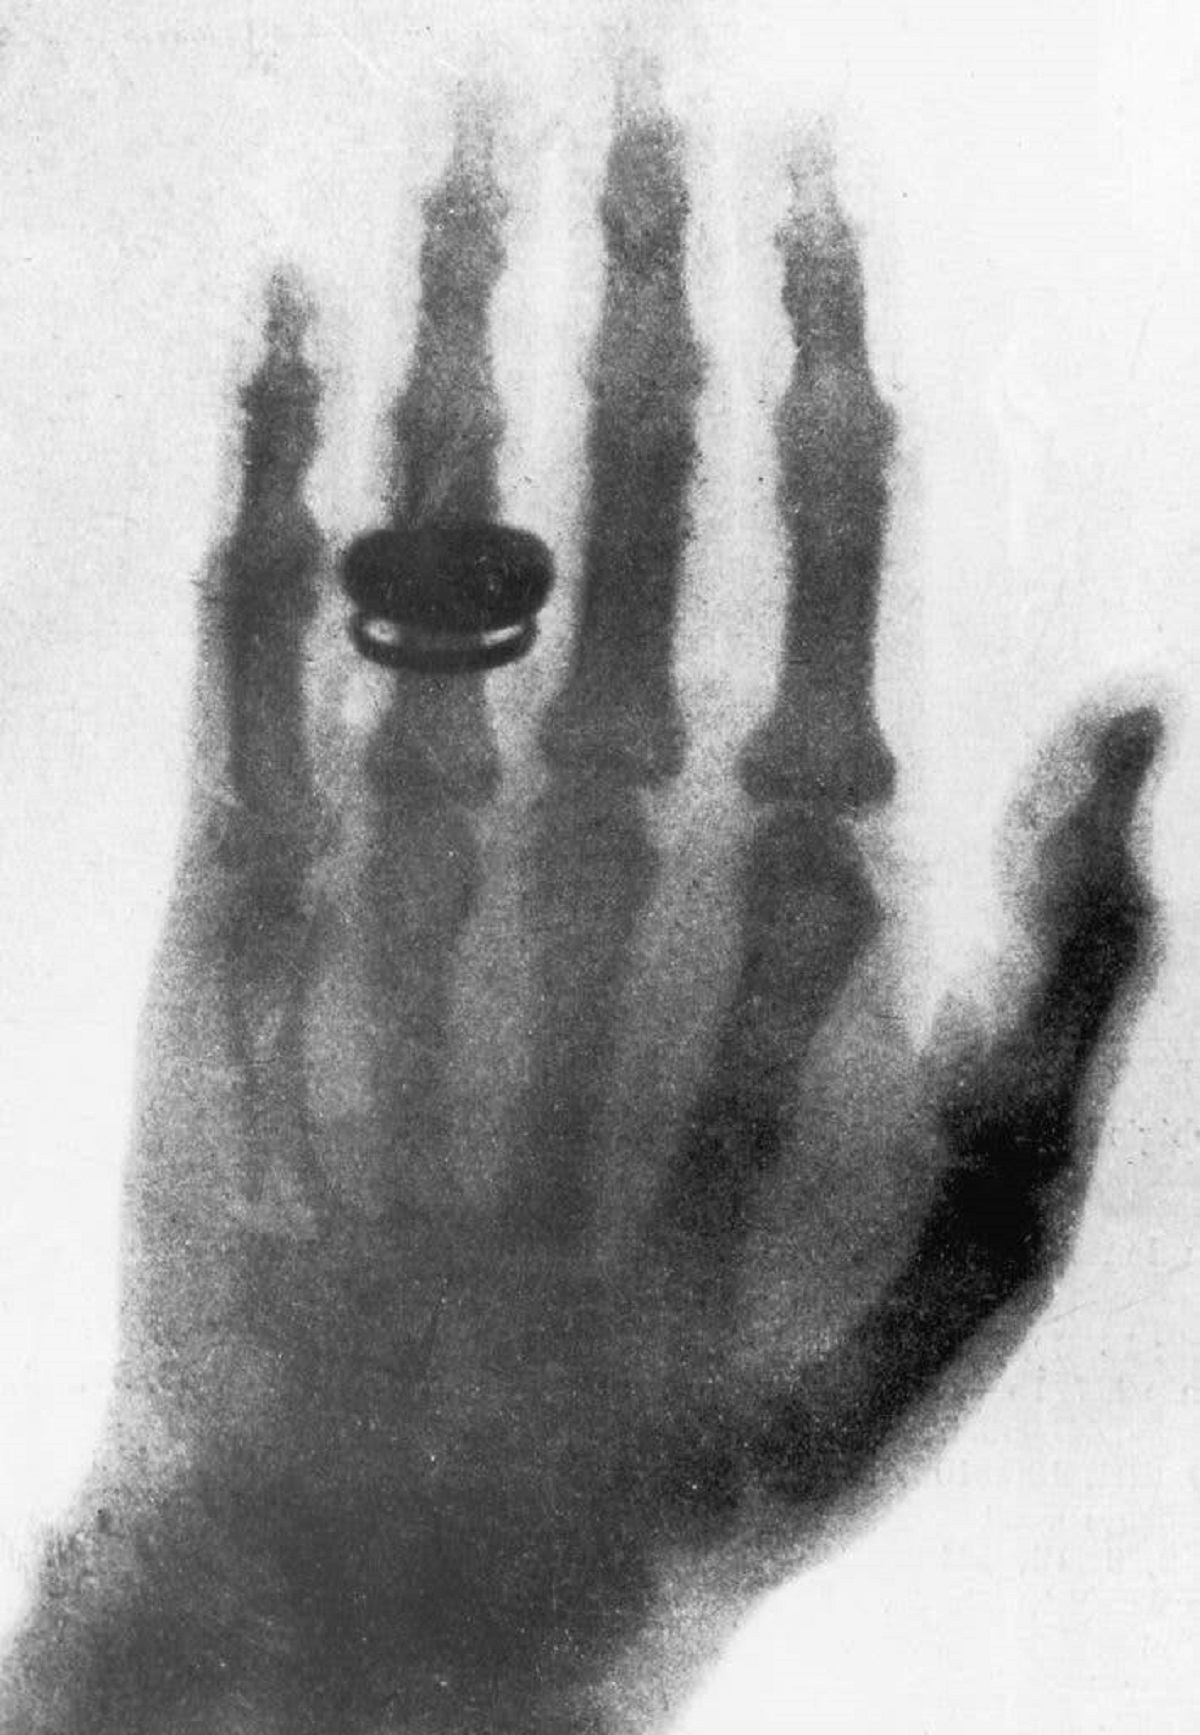 This X-ray, taken by Wilhelm Conrad Röntgen, is the first X-ray ever: